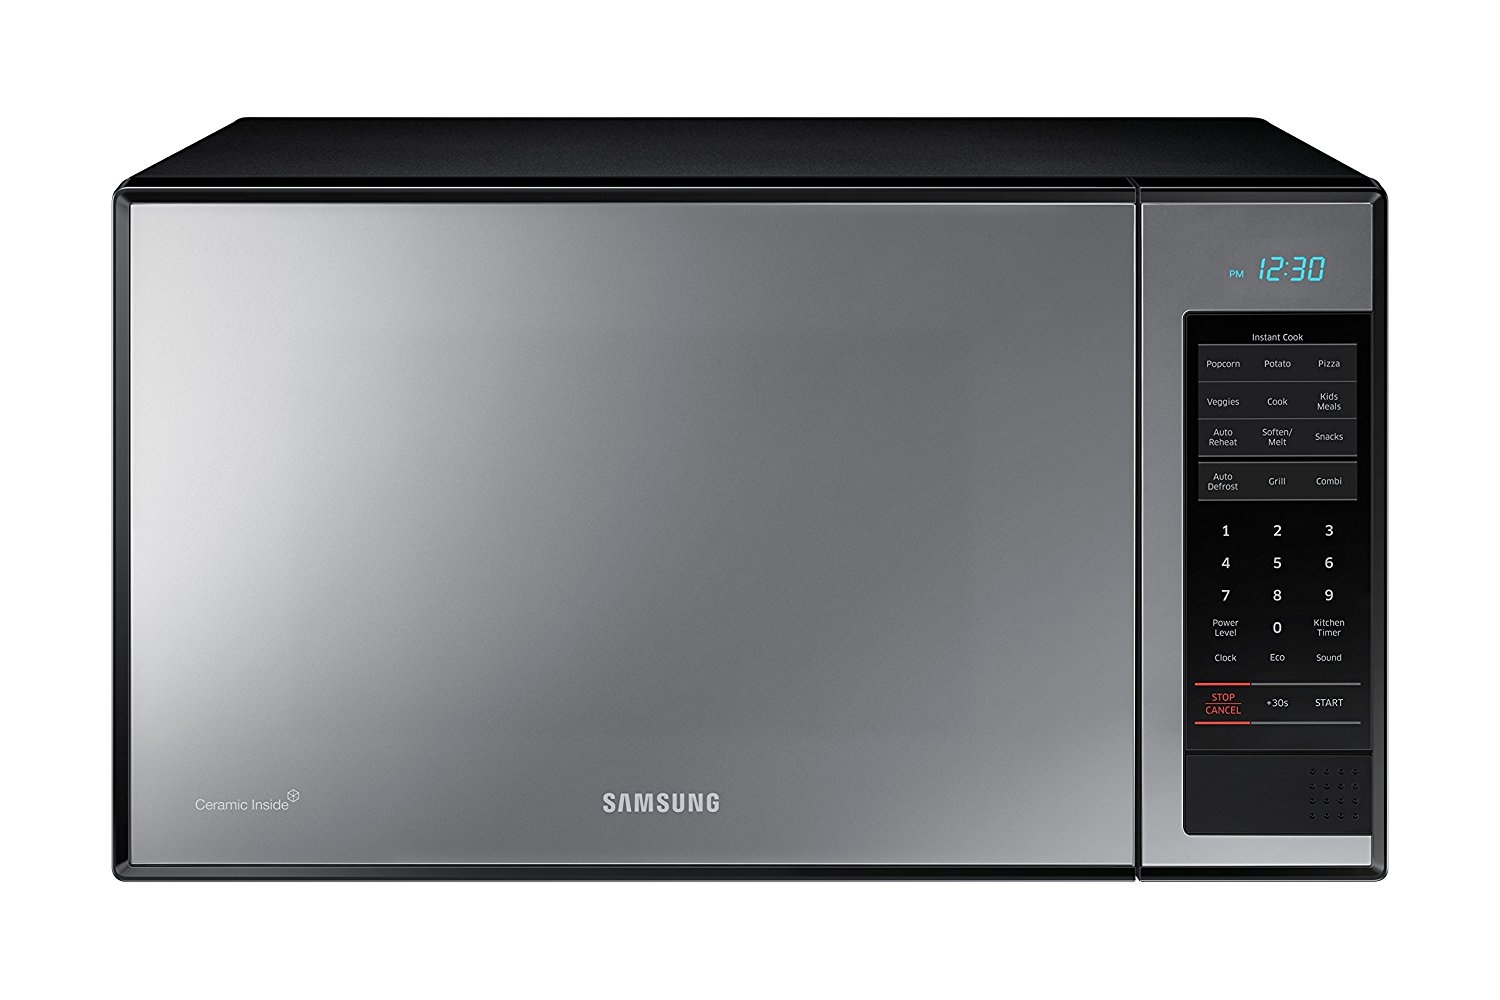 Samsung MG14H3020CM 1.4 cu. ft. Countertop Grill Microwave Oven with